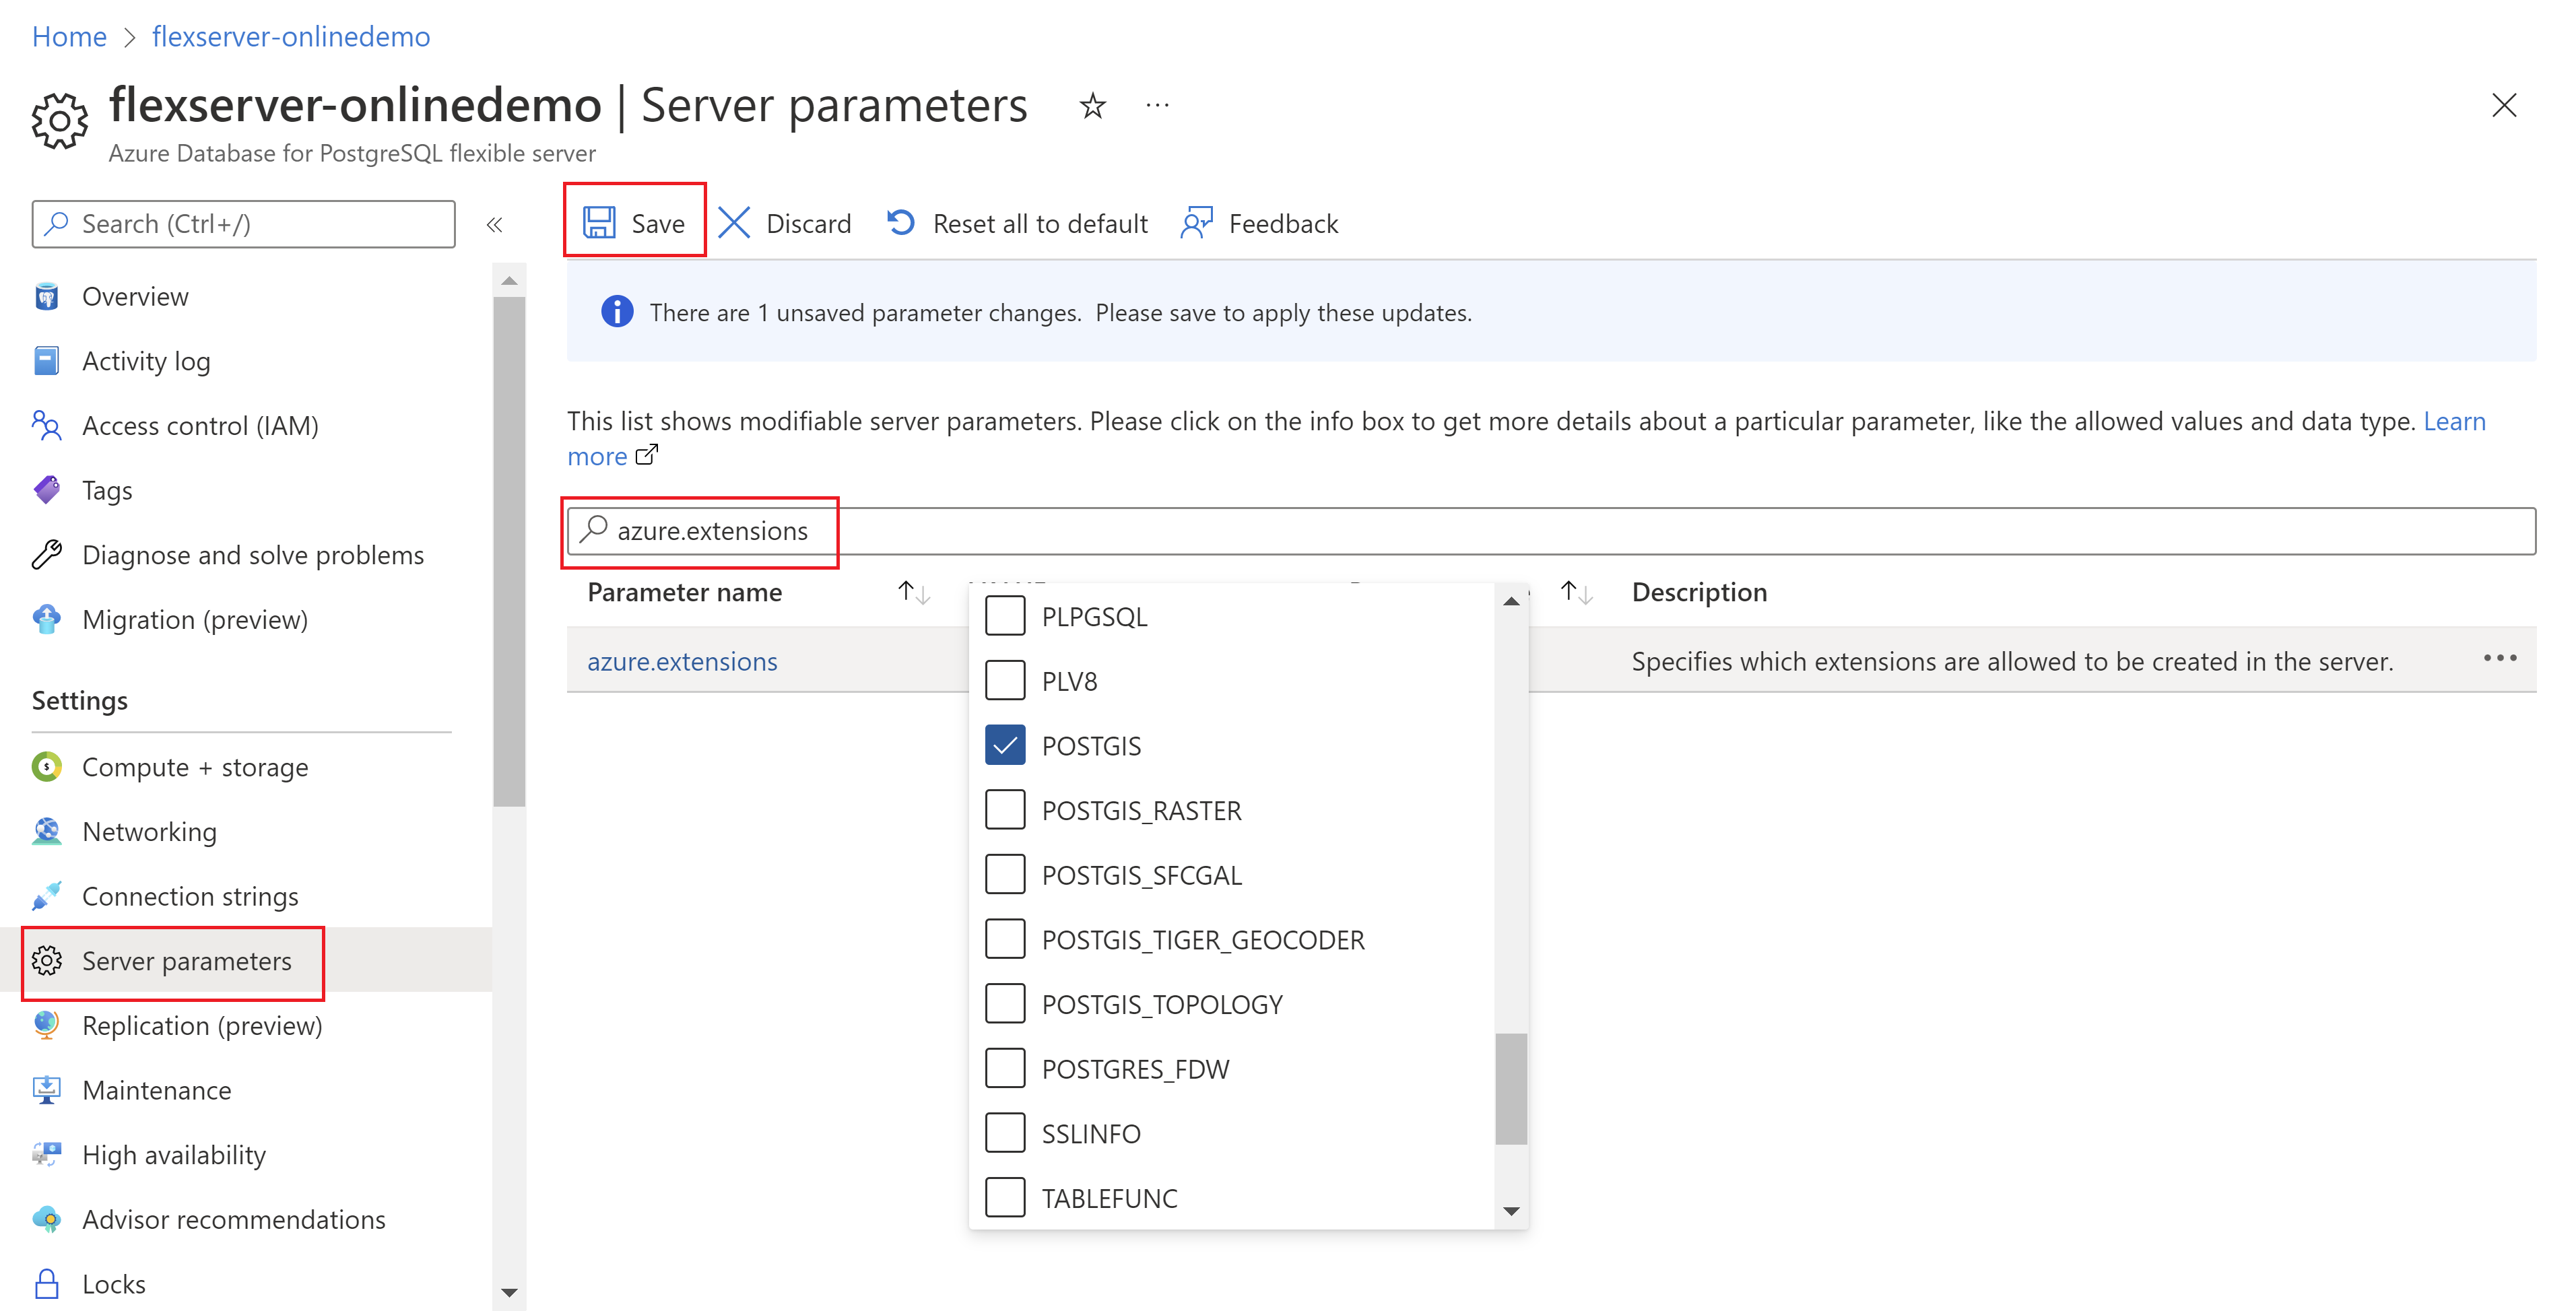 Screenshot of PG extension support in the Flexible Server Azure portal.